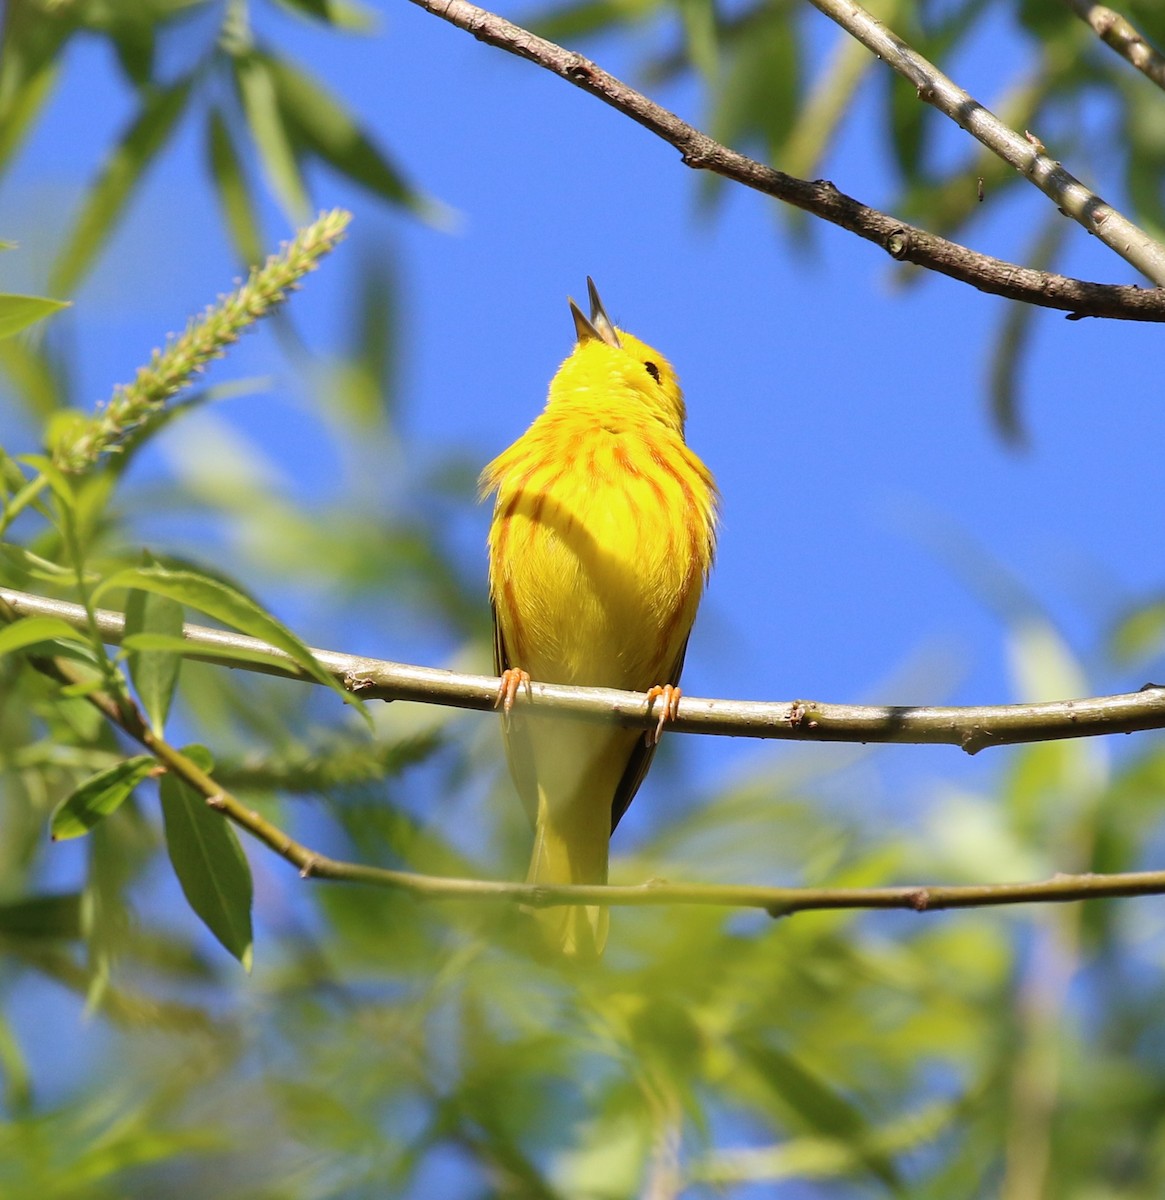 Yellow Warbler - maggie peretto